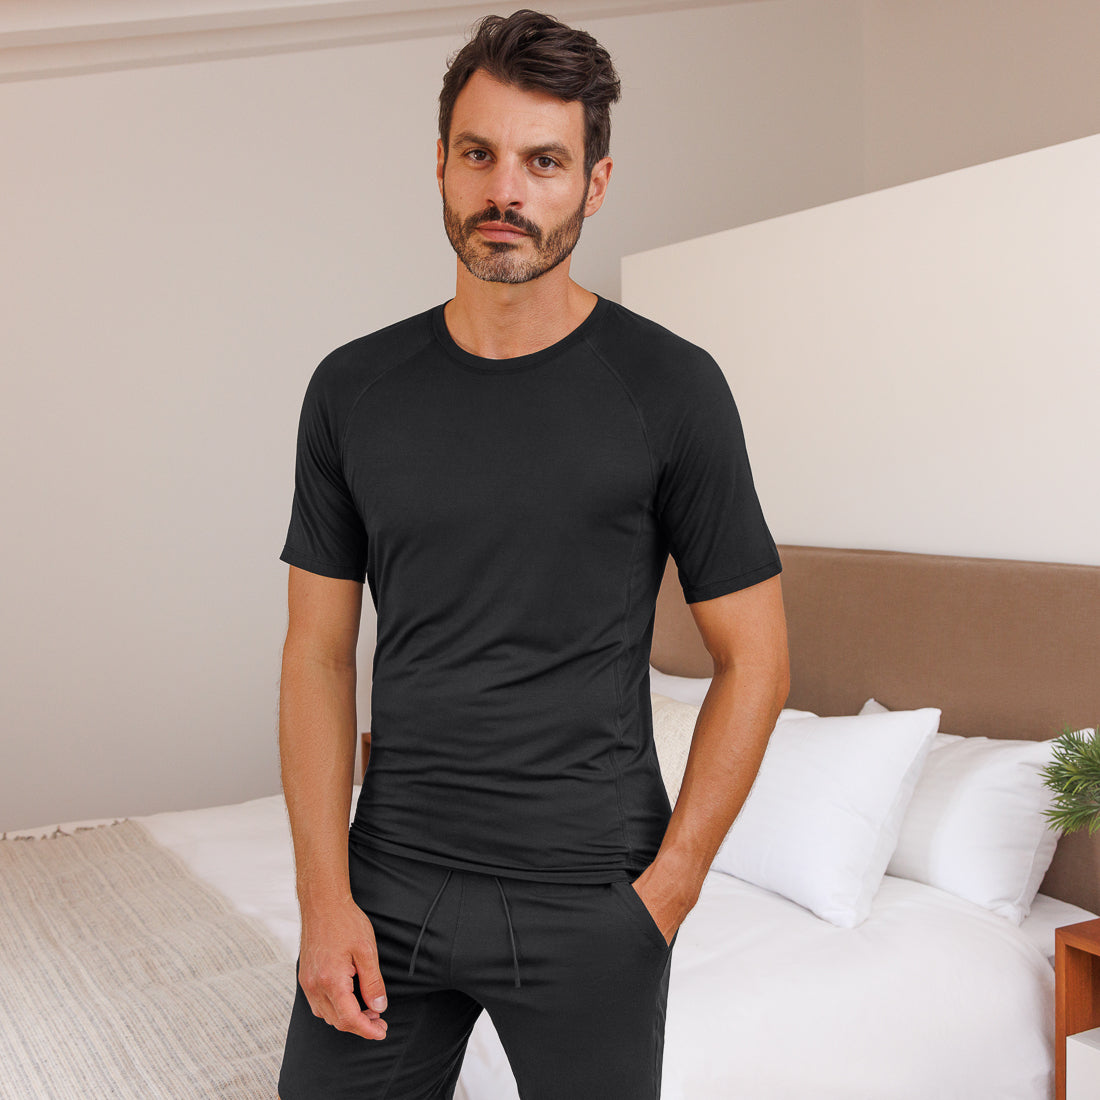 Find Comfortable 95 Cotton 5 Spandex T-shirts 